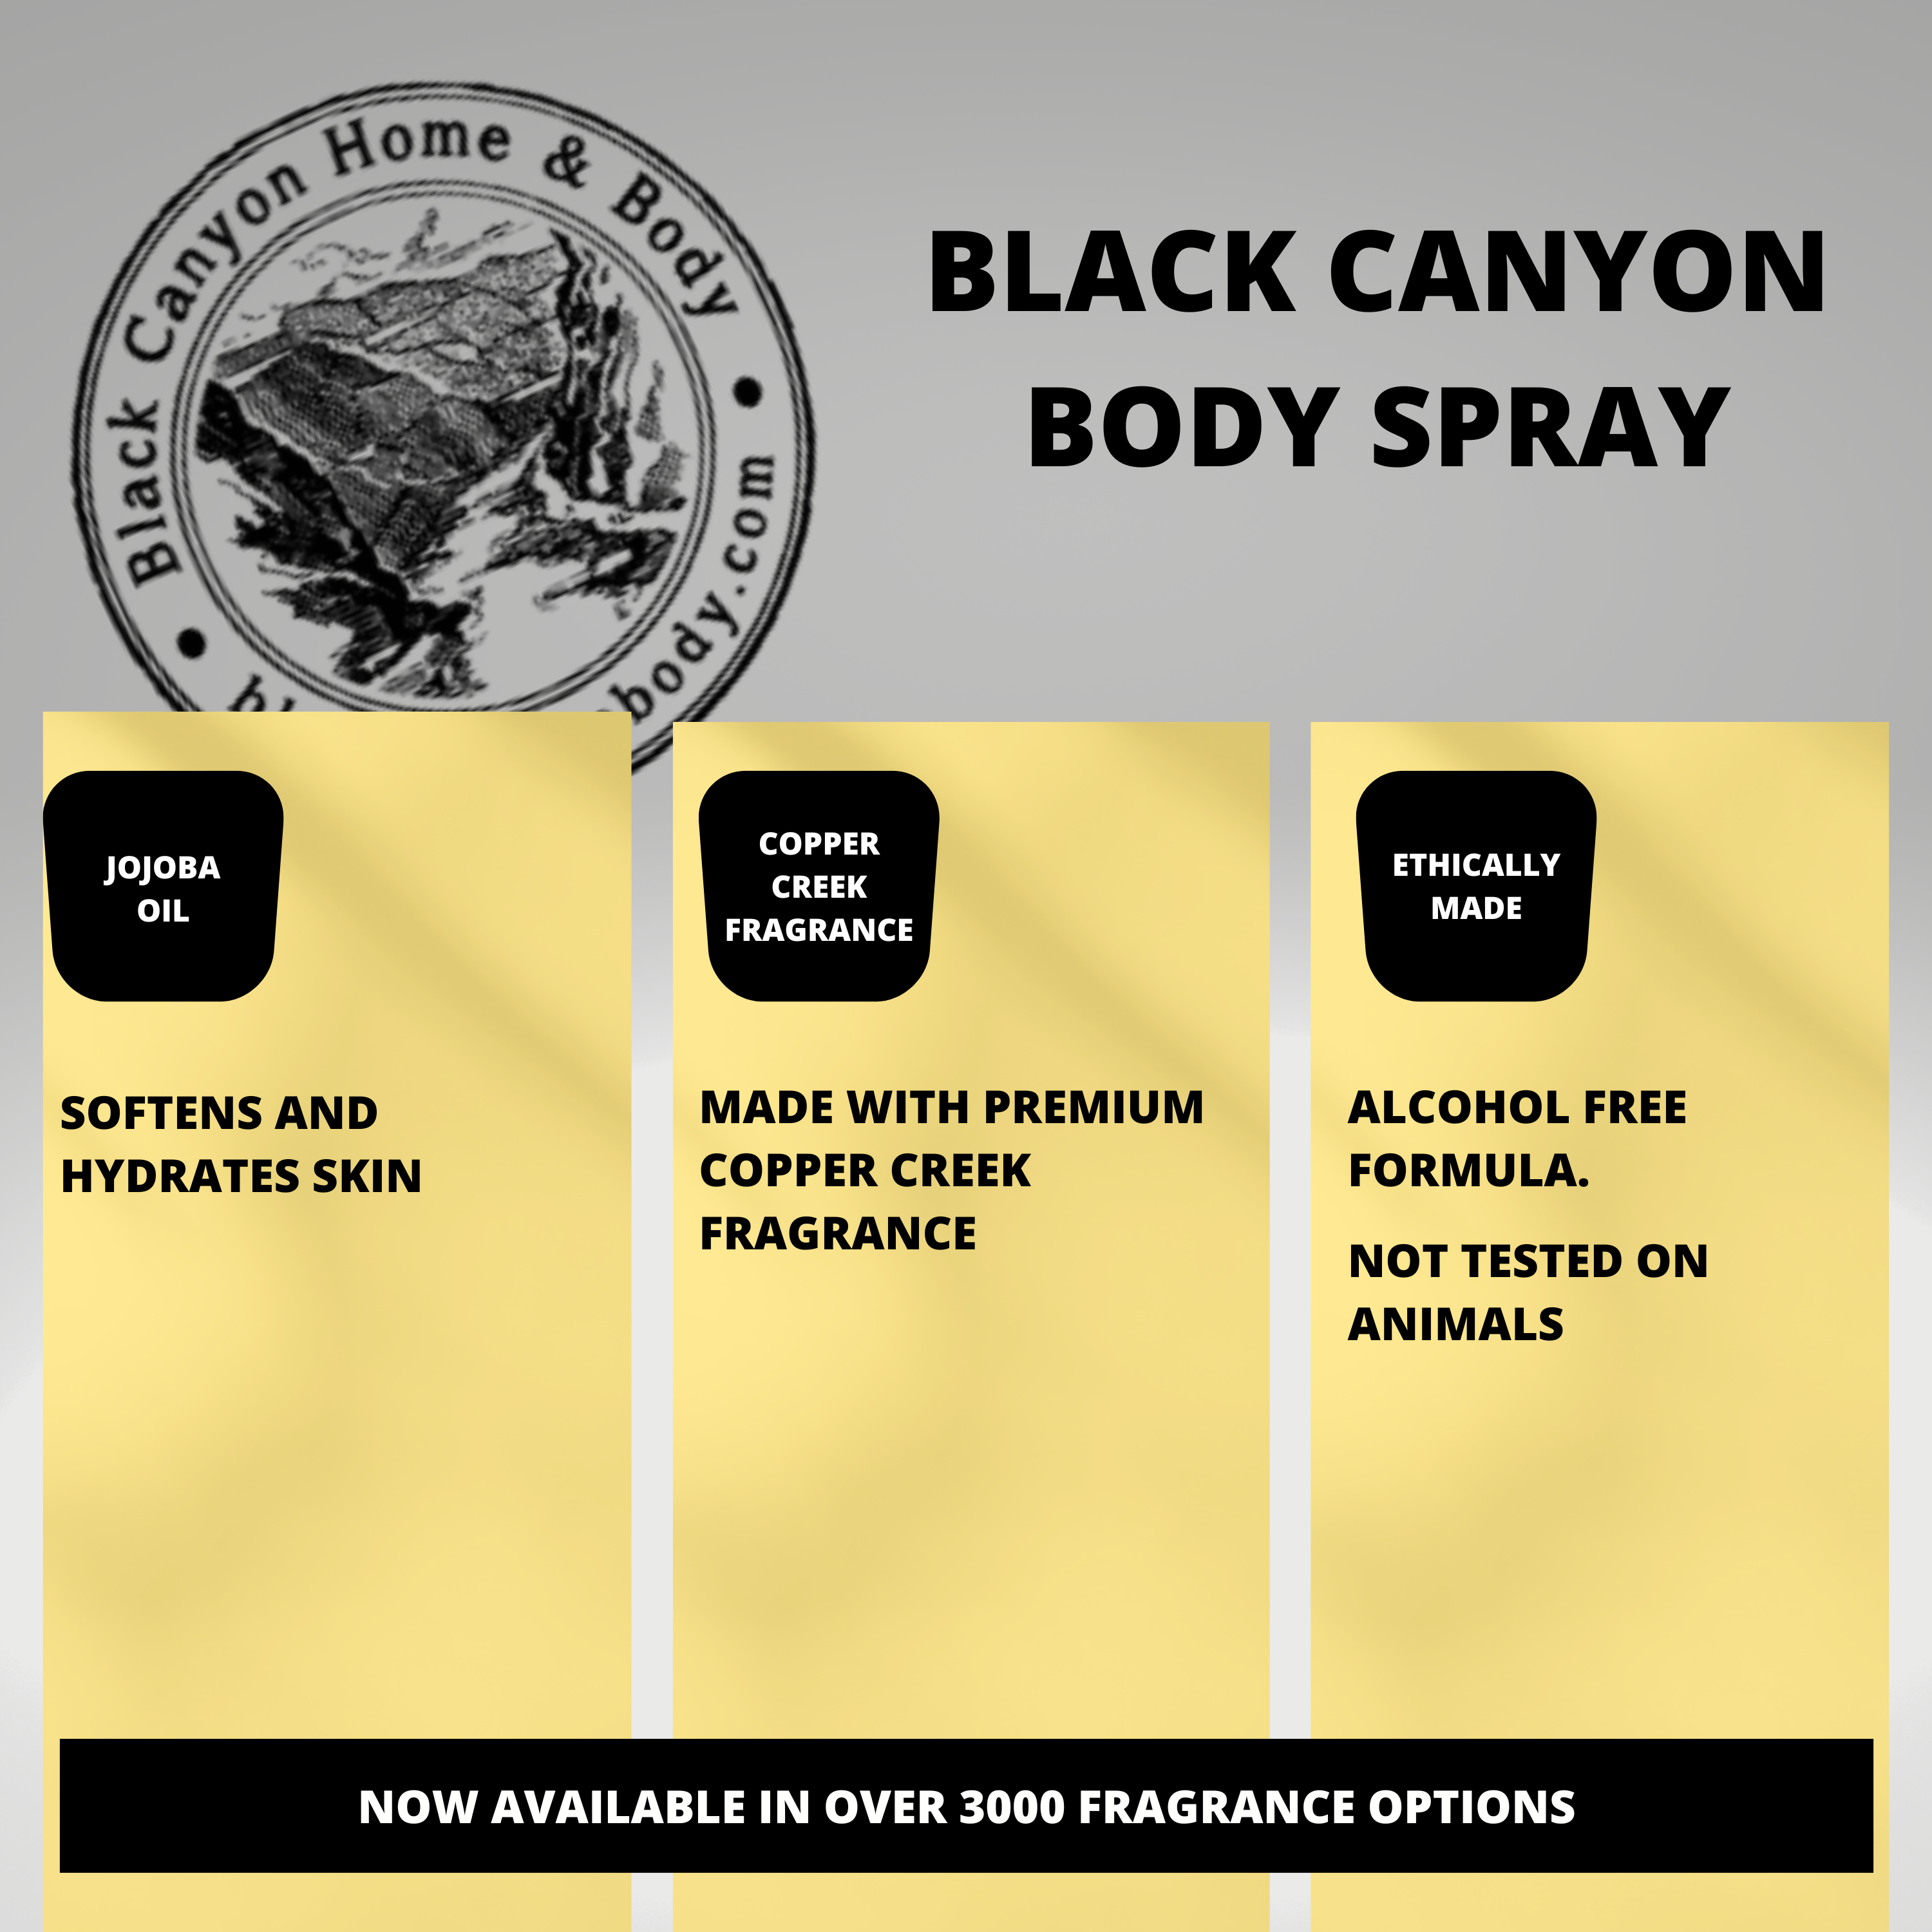 Black Canyon Lily & Peach Scented Body Spray